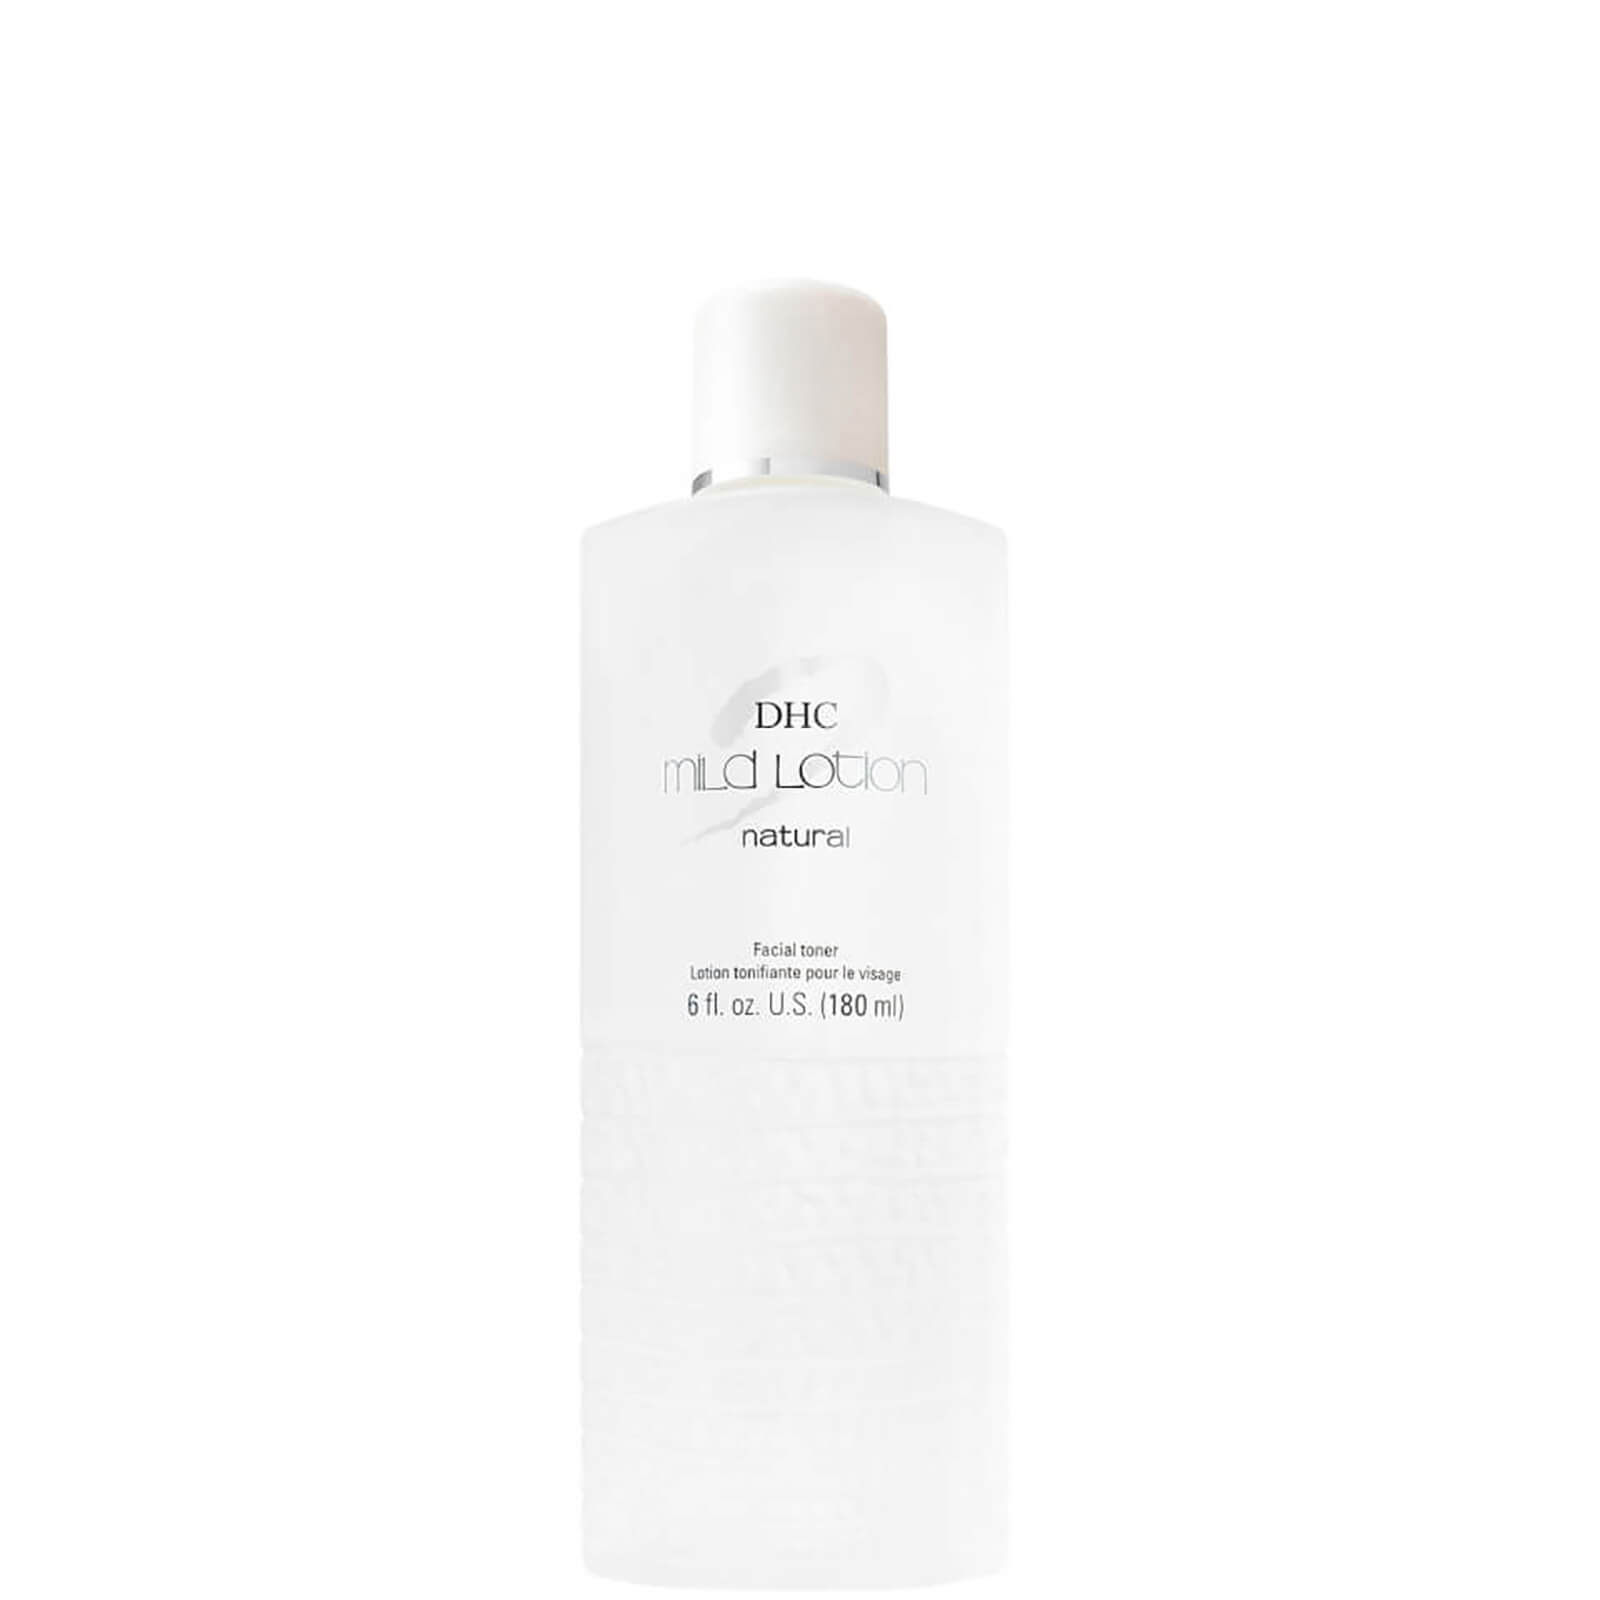 Image of DHC Mild Lotion - 180ml